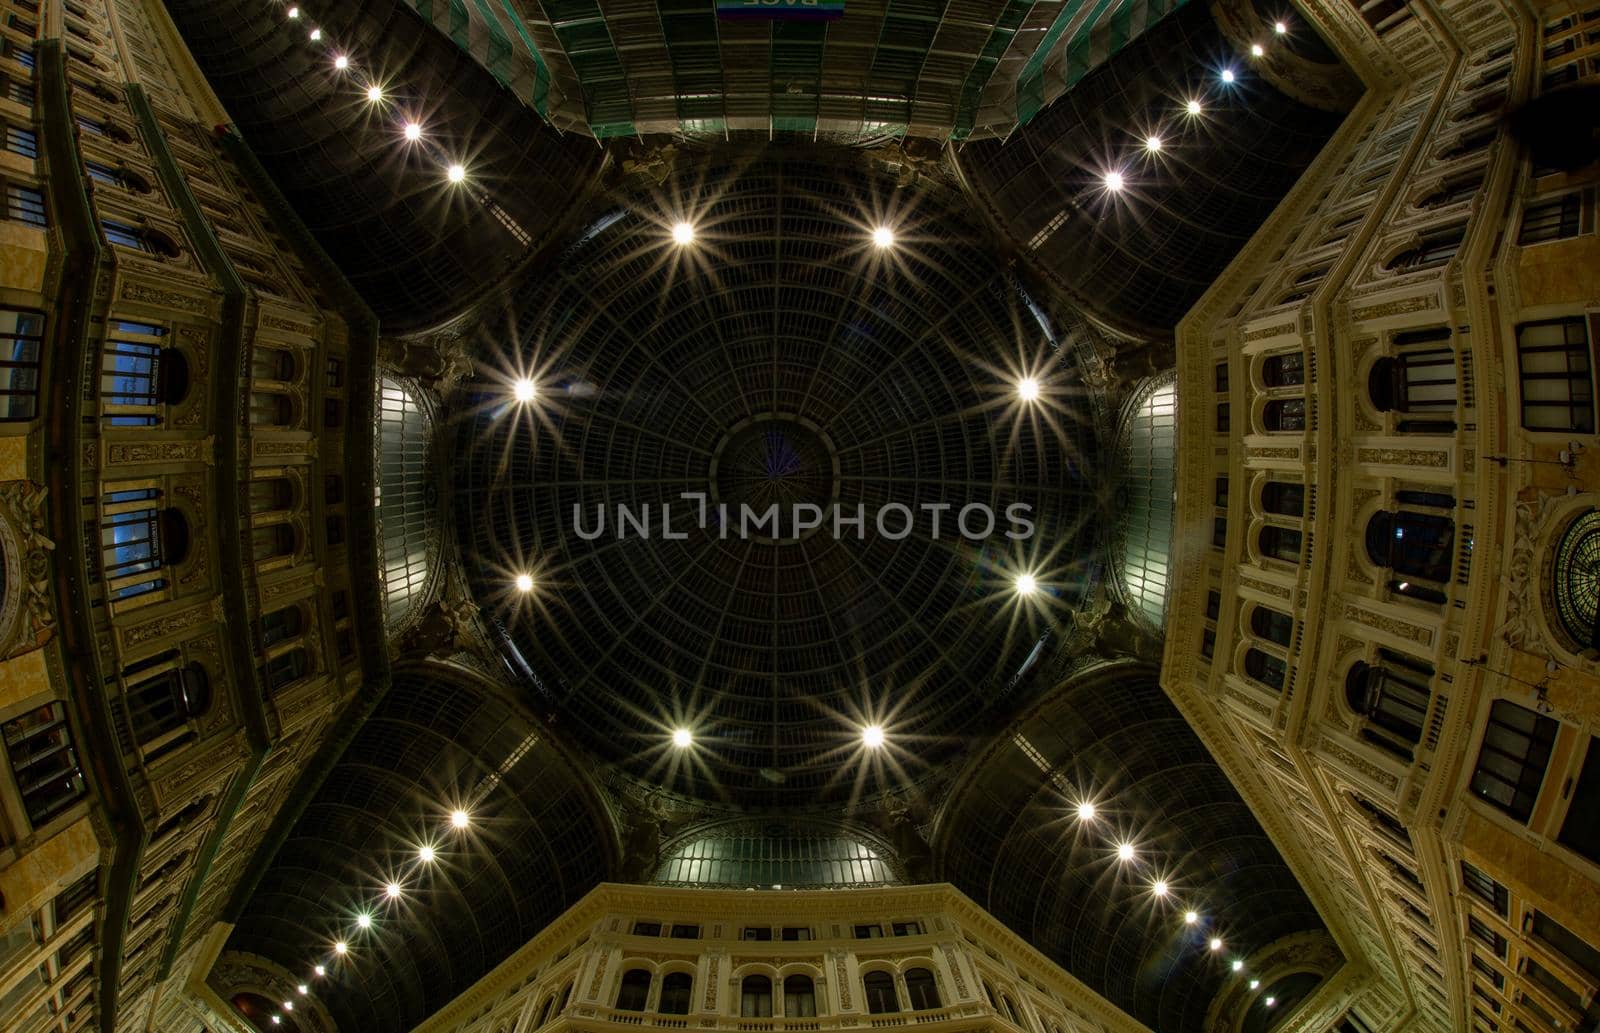 The Umberto Gallery in Naples with its glass ceiling attracts many tourists